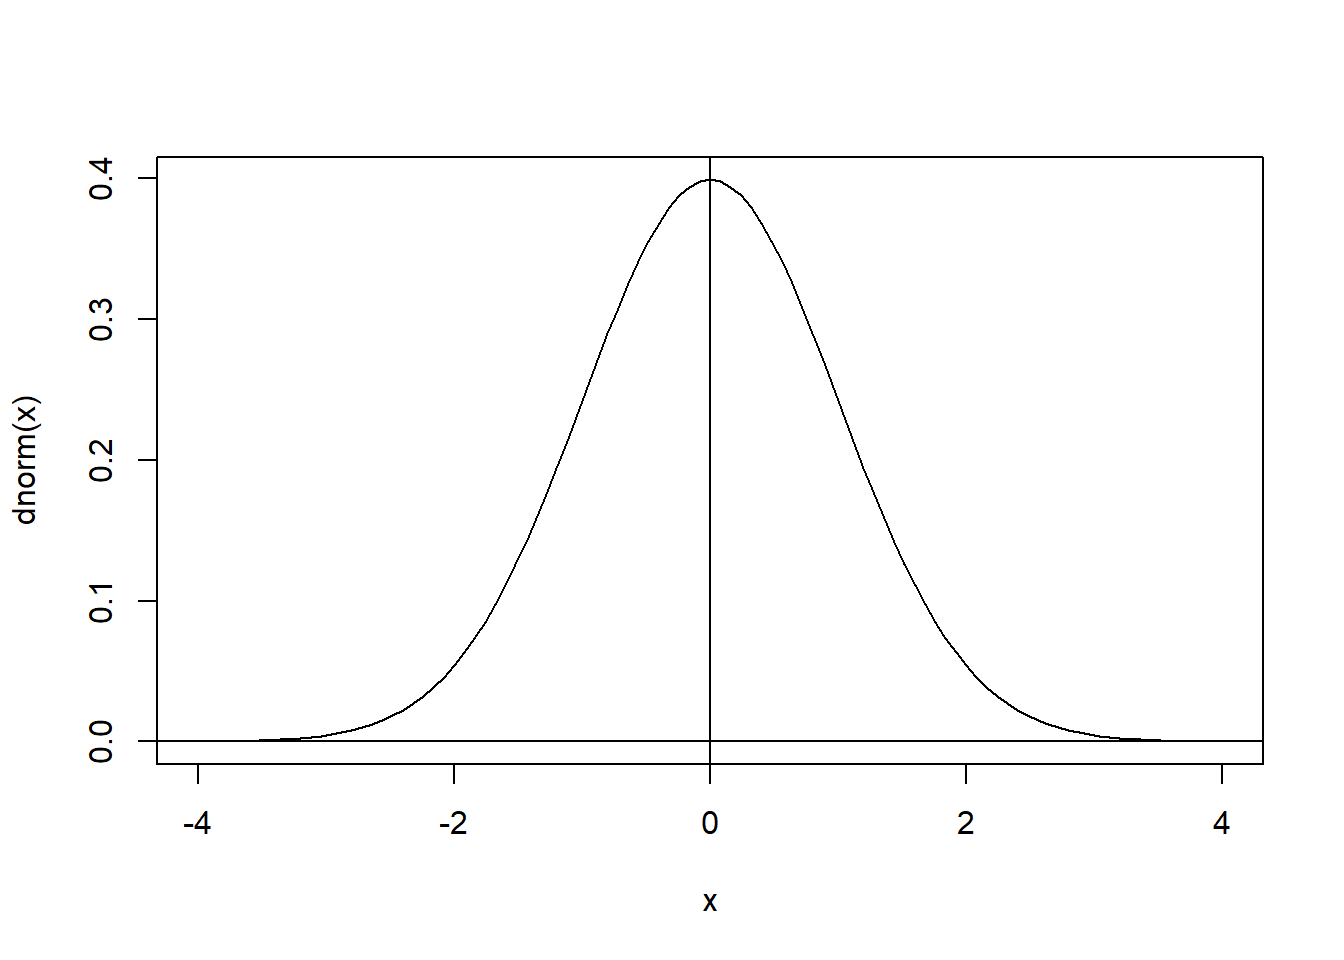 The standard normal distribution